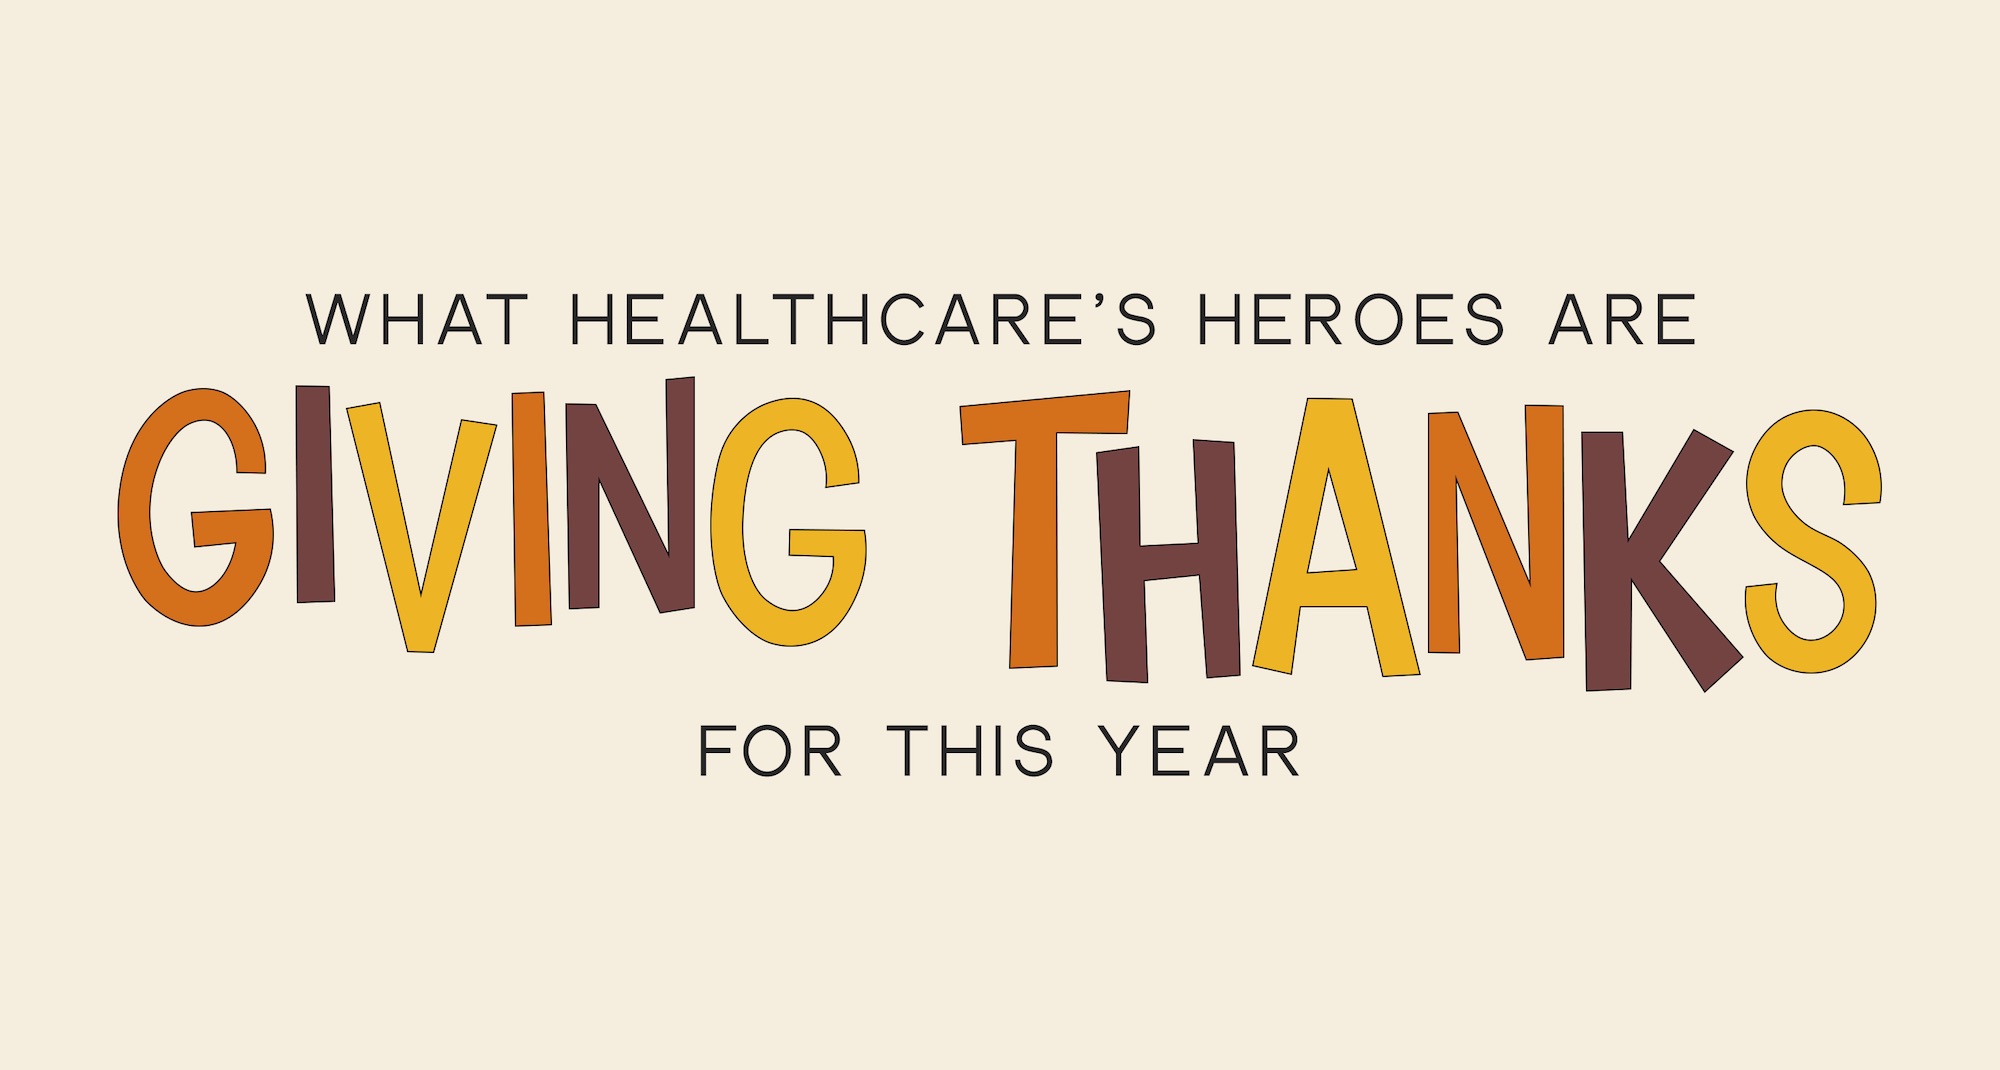 What Healthcare’s Heroes Are Giving Thanks for This Year